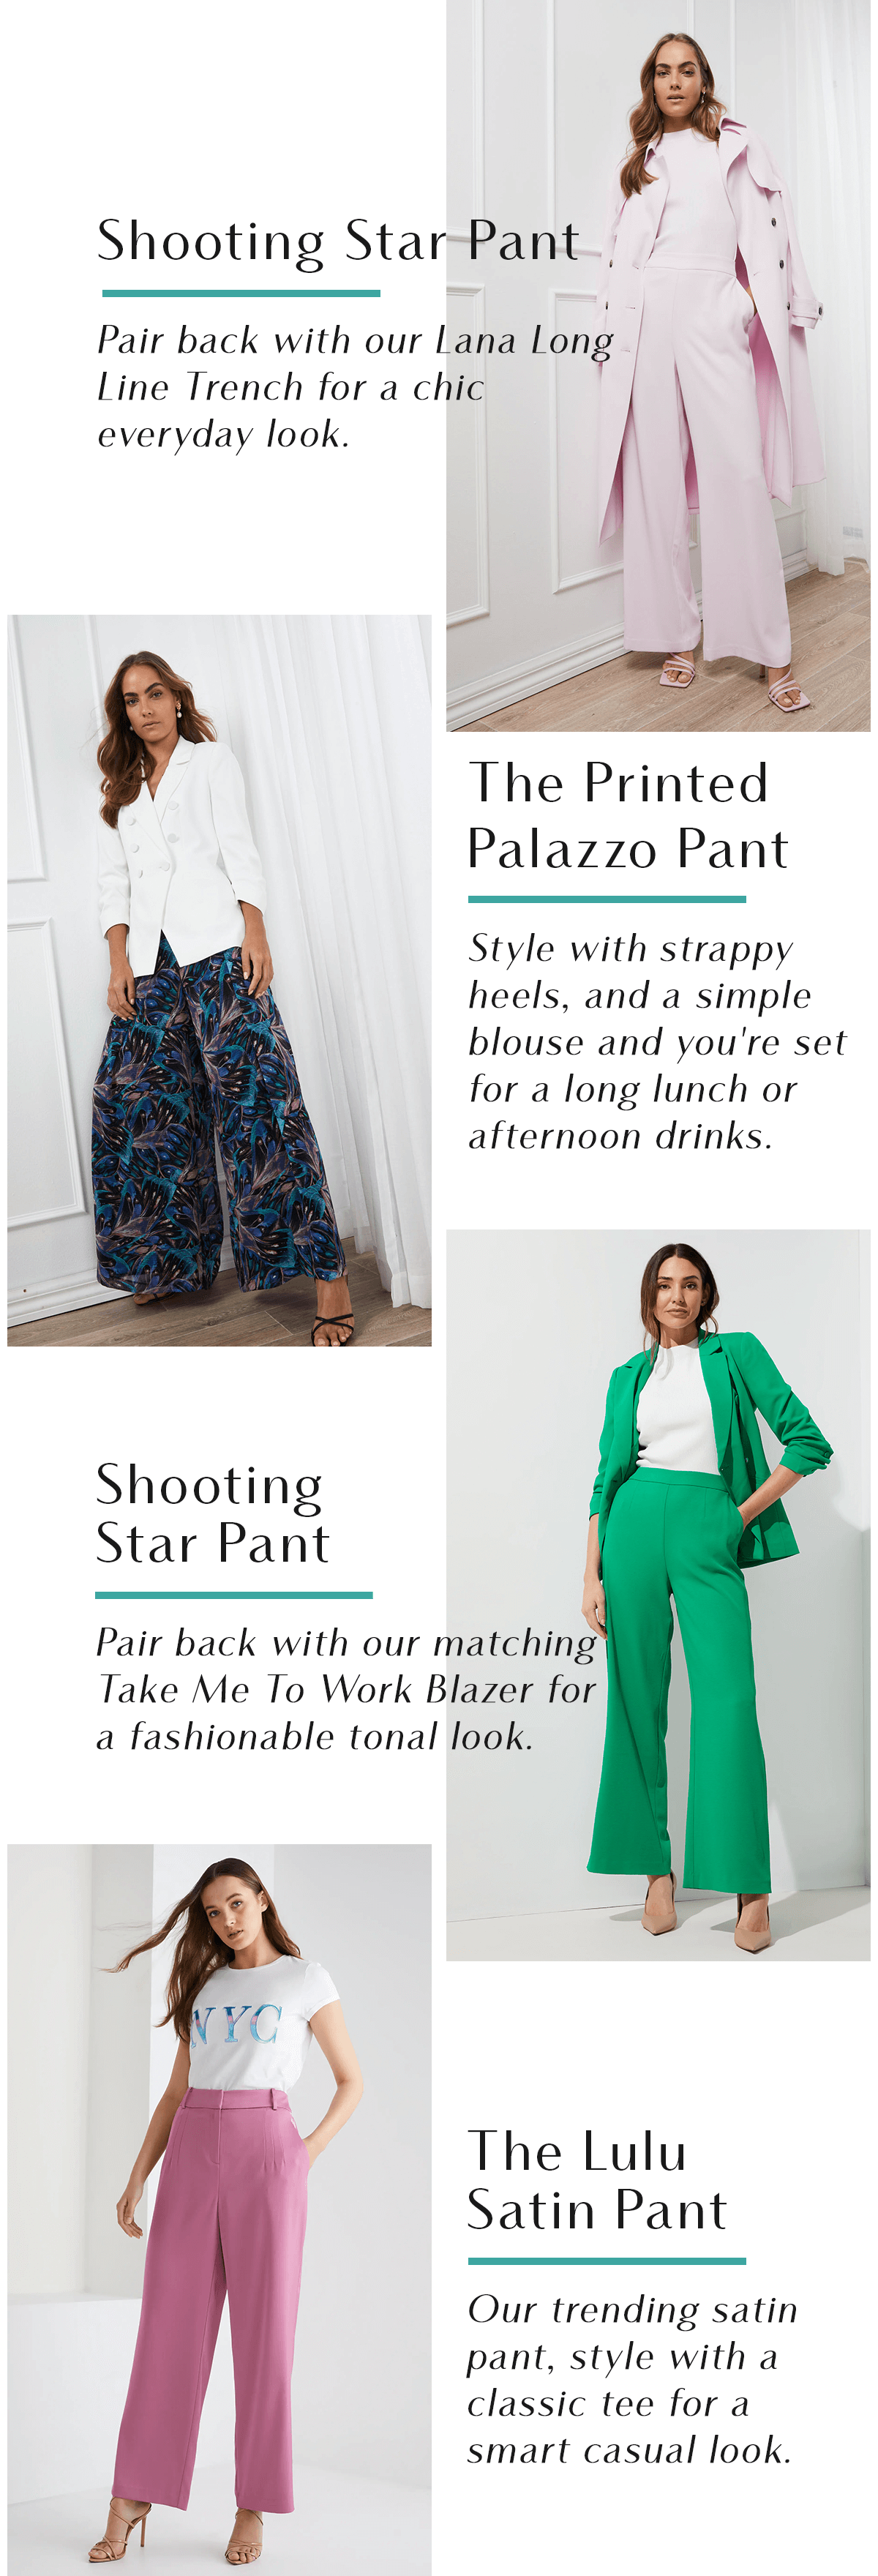 Shooting Star Pant  Pair back with our Lana Long Line Trench for a chic everyday look. The Printed Palazzo Pant  Style with strappy heels, and a simple blouse and you're set for a long lunch or afternoon drinks. Shooting Star Pant  Pair back with our matching Take Me To Work Blazer for a fashionable tonal look. The Lulu Satin Pant   Our trending satin pant, style with a classic tee for a smart casual look. 